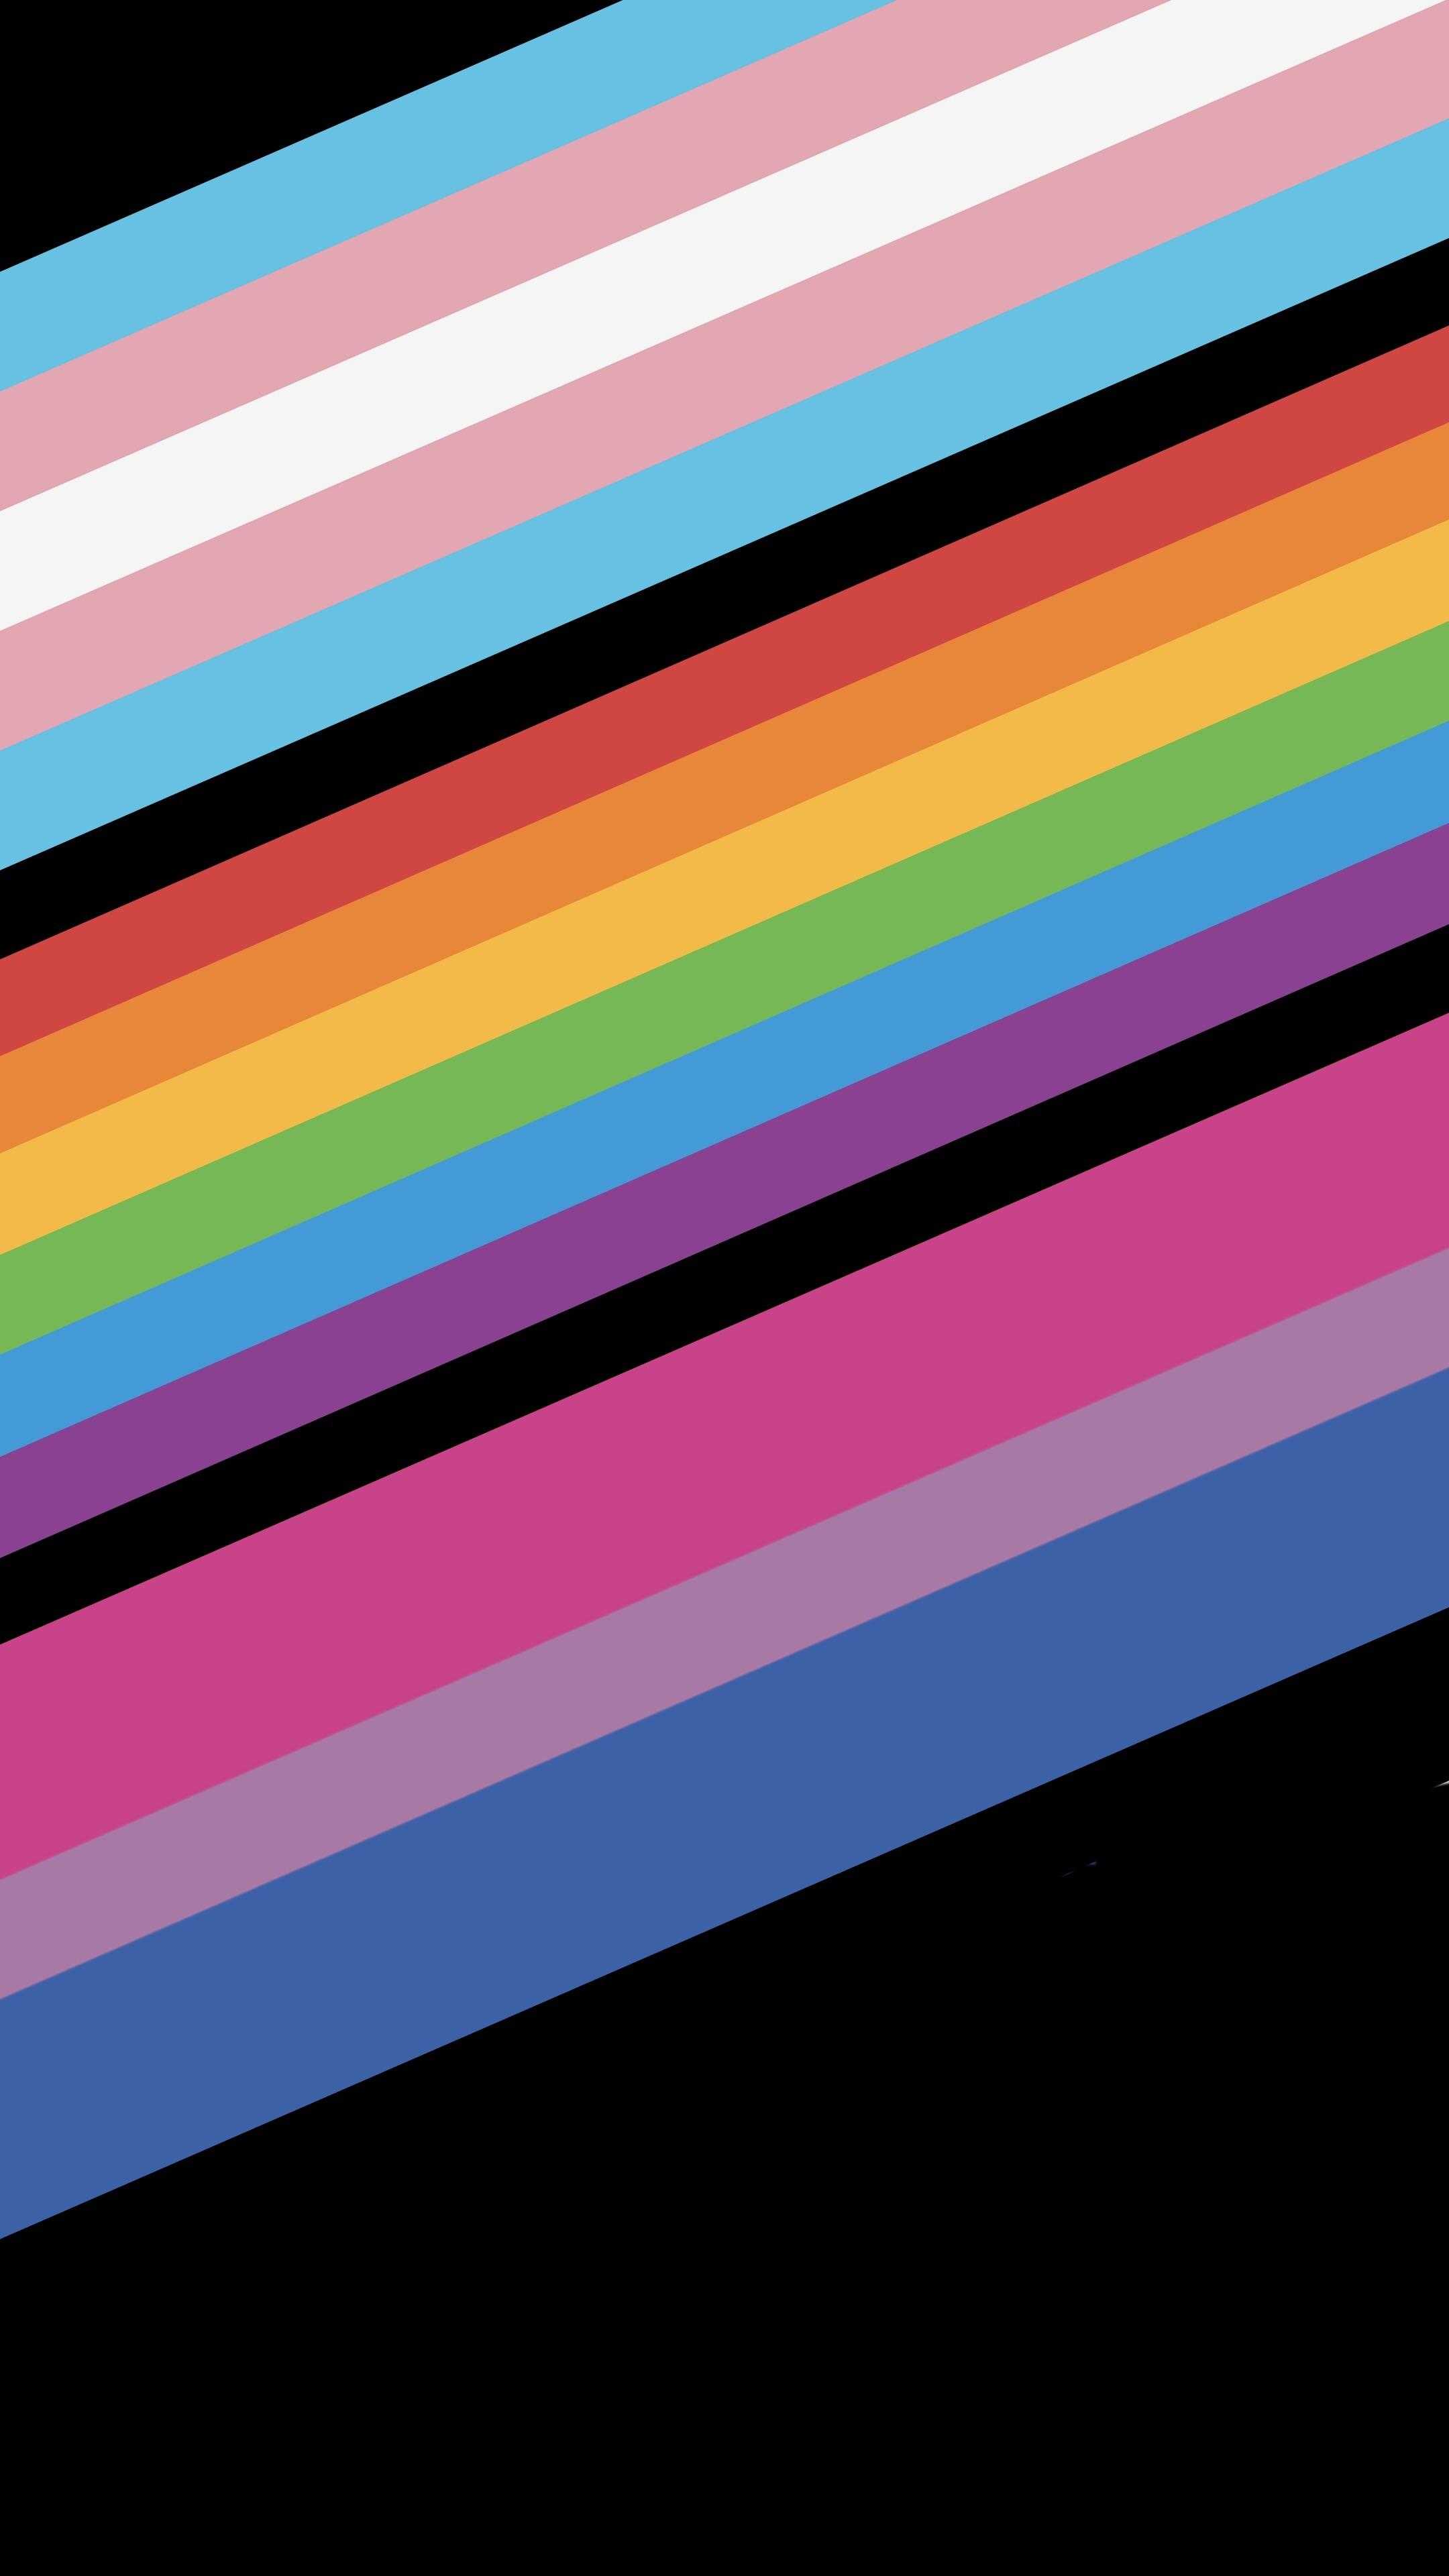 A black background with a pride flag made up of many different stripes - Pansexual